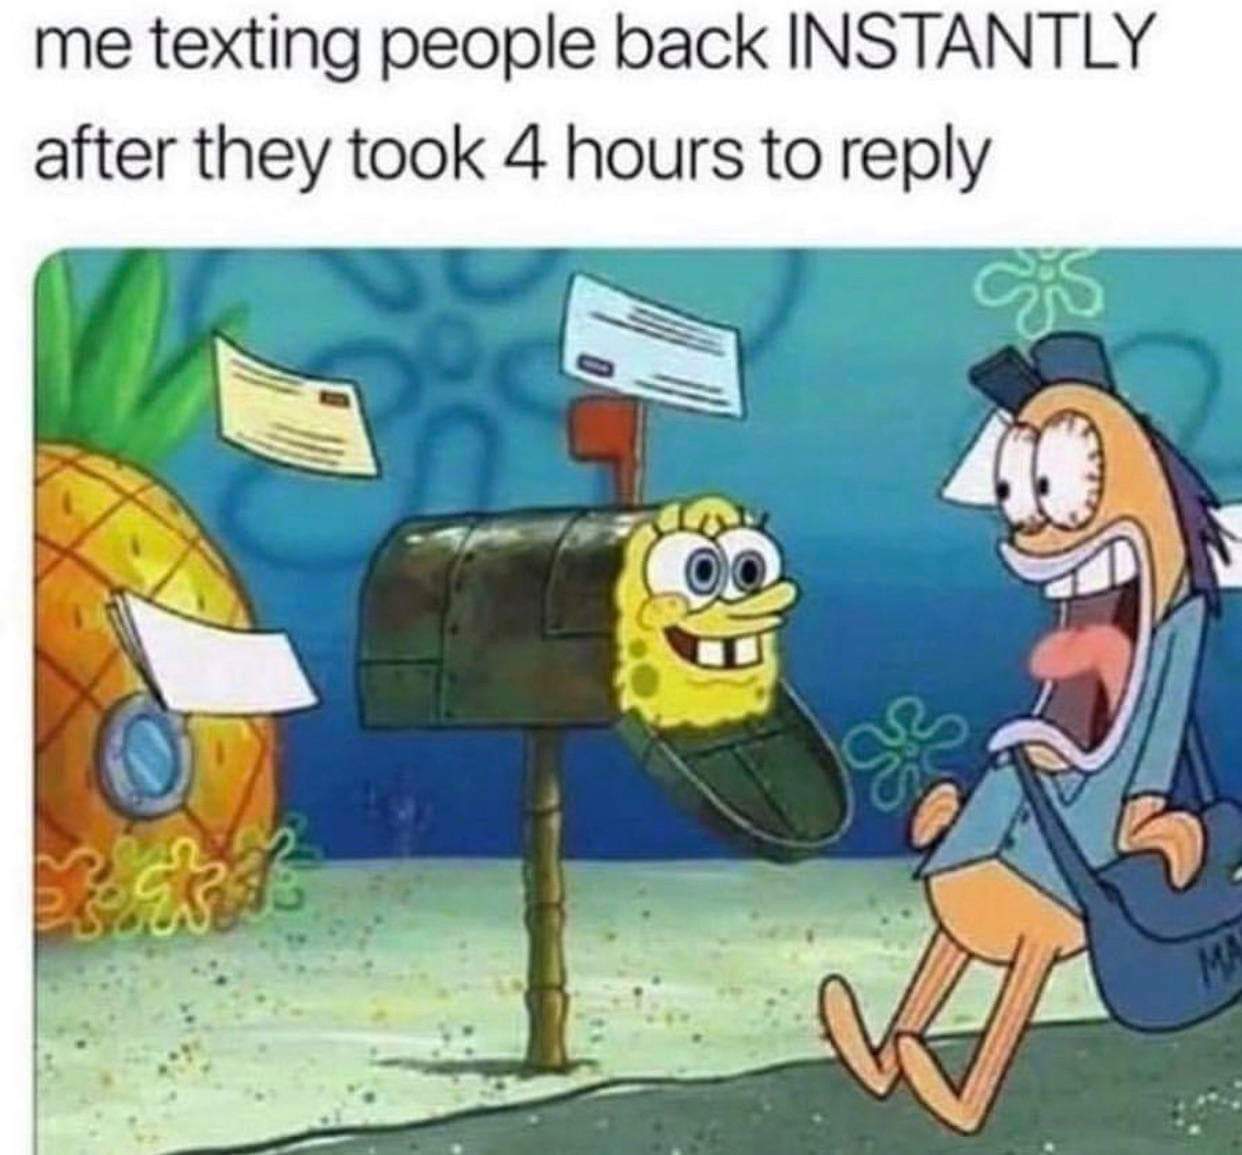 funny fortnite memes - me texting people back Instantly after they took 4 hours to